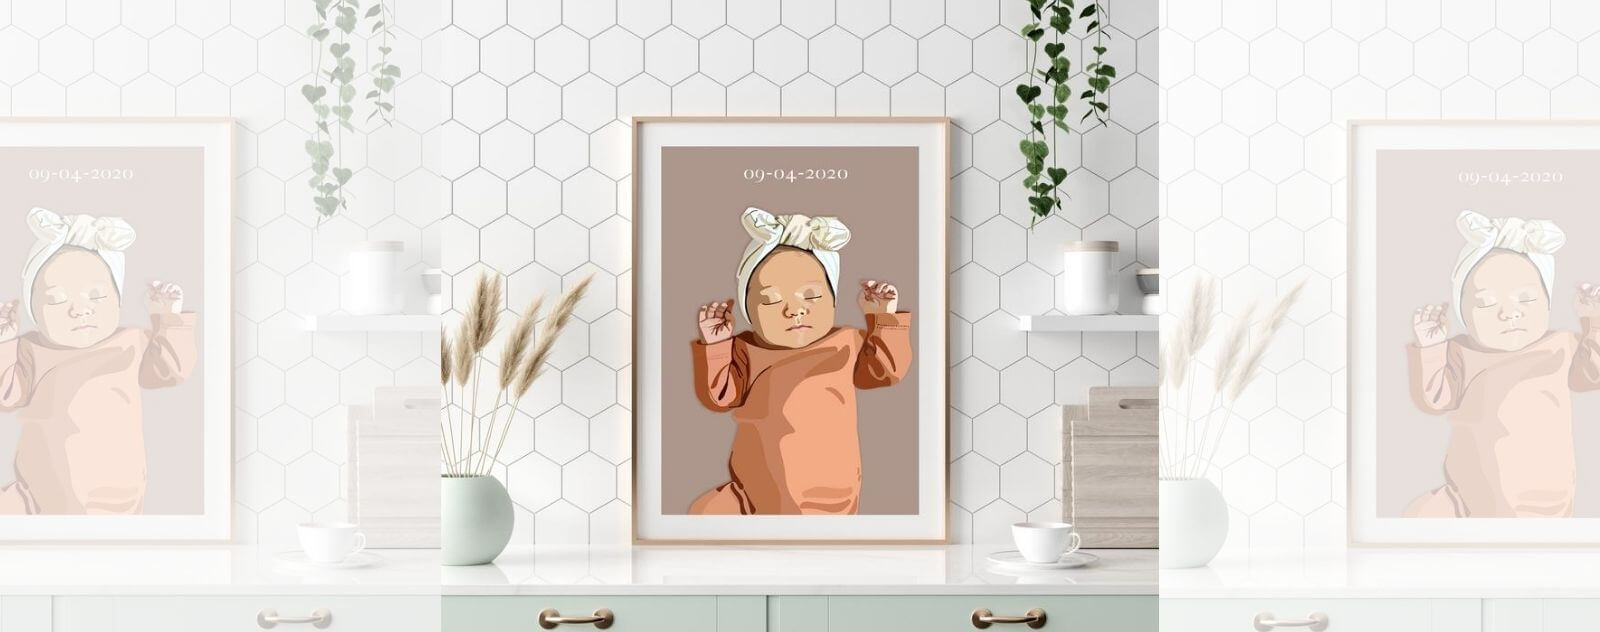 A Personalized Poster as a Birth Gift for a Baby's First Birthday